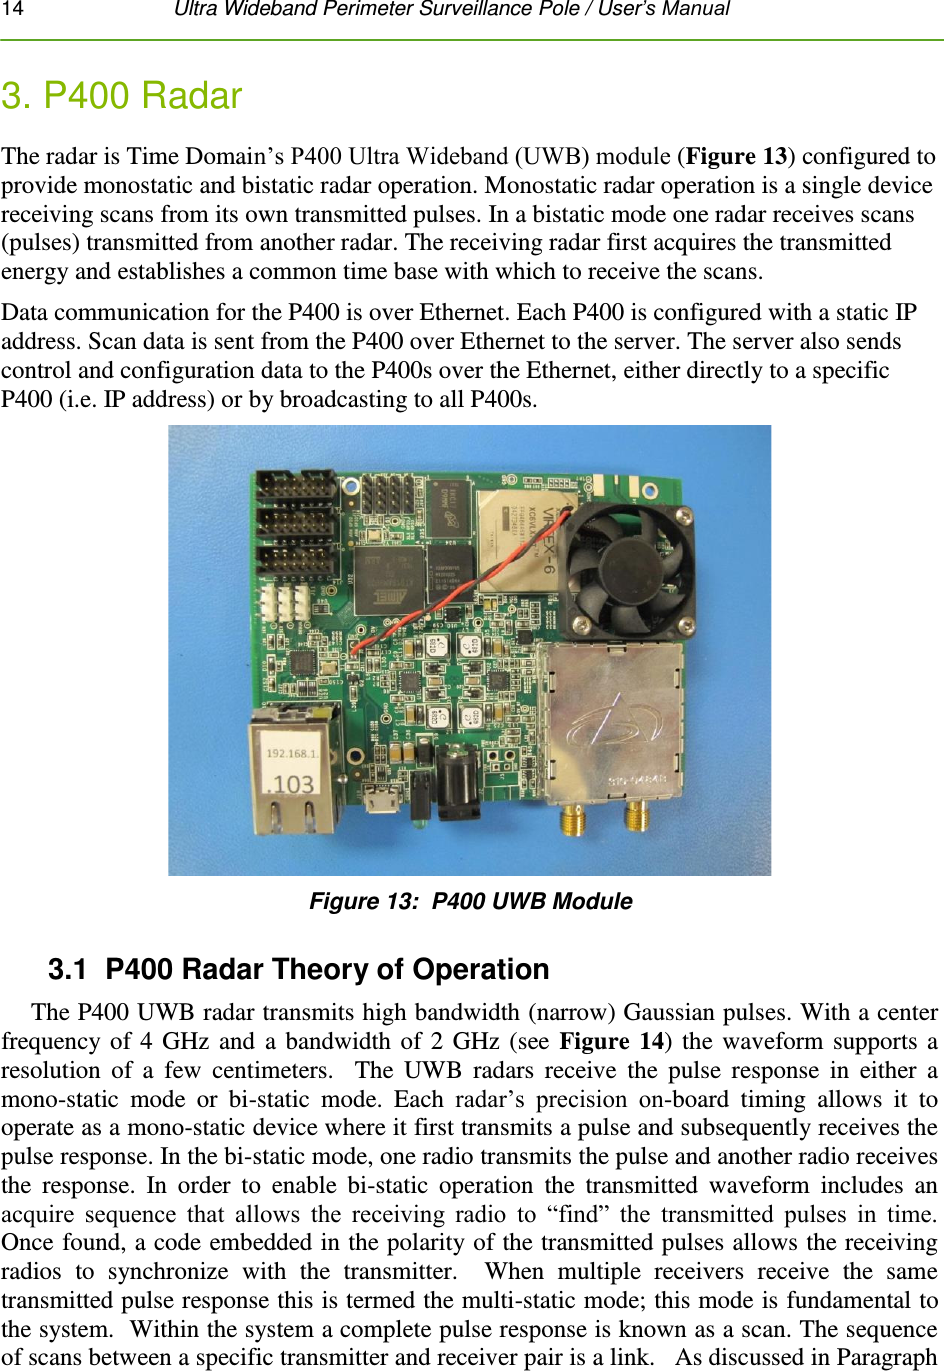 14   Ultra Wideband Perimeter Surveillance Pole / User’s Manual  3. P400 Radar The radar is Time Domain’s P400 Ultra Wideband (UWB) module (Figure 13) configured to provide monostatic and bistatic radar operation. Monostatic radar operation is a single device receiving scans from its own transmitted pulses. In a bistatic mode one radar receives scans (pulses) transmitted from another radar. The receiving radar first acquires the transmitted energy and establishes a common time base with which to receive the scans. Data communication for the P400 is over Ethernet. Each P400 is configured with a static IP address. Scan data is sent from the P400 over Ethernet to the server. The server also sends control and configuration data to the P400s over the Ethernet, either directly to a specific P400 (i.e. IP address) or by broadcasting to all P400s.  Figure 13:  P400 UWB Module 3.1  P400 Radar Theory of Operation The P400 UWB radar transmits high bandwidth (narrow) Gaussian pulses. With a center frequency of 4 GHz and a bandwidth of 2 GHz (see Figure 14) the waveform supports a resolution  of  a  few  centimeters.    The  UWB  radars  receive  the  pulse  response  in  either  a mono-static  mode  or  bi-static  mode.  Each  radar’s  precision  on-board  timing  allows  it  to operate as a mono-static device where it first transmits a pulse and subsequently receives the pulse response. In the bi-static mode, one radio transmits the pulse and another radio receives the  response.  In  order  to  enable  bi-static  operation  the  transmitted  waveform  includes  an acquire  sequence  that  allows  the  receiving  radio  to  “find”  the  transmitted  pulses  in  time.  Once found, a code embedded in the polarity of the transmitted pulses allows the receiving radios  to  synchronize  with  the  transmitter.    When  multiple  receivers  receive  the  same transmitted pulse response this is termed the multi-static mode; this mode is fundamental to the system.  Within the system a complete pulse response is known as a scan. The sequence of scans between a specific transmitter and receiver pair is a link.   As discussed in Paragraph 